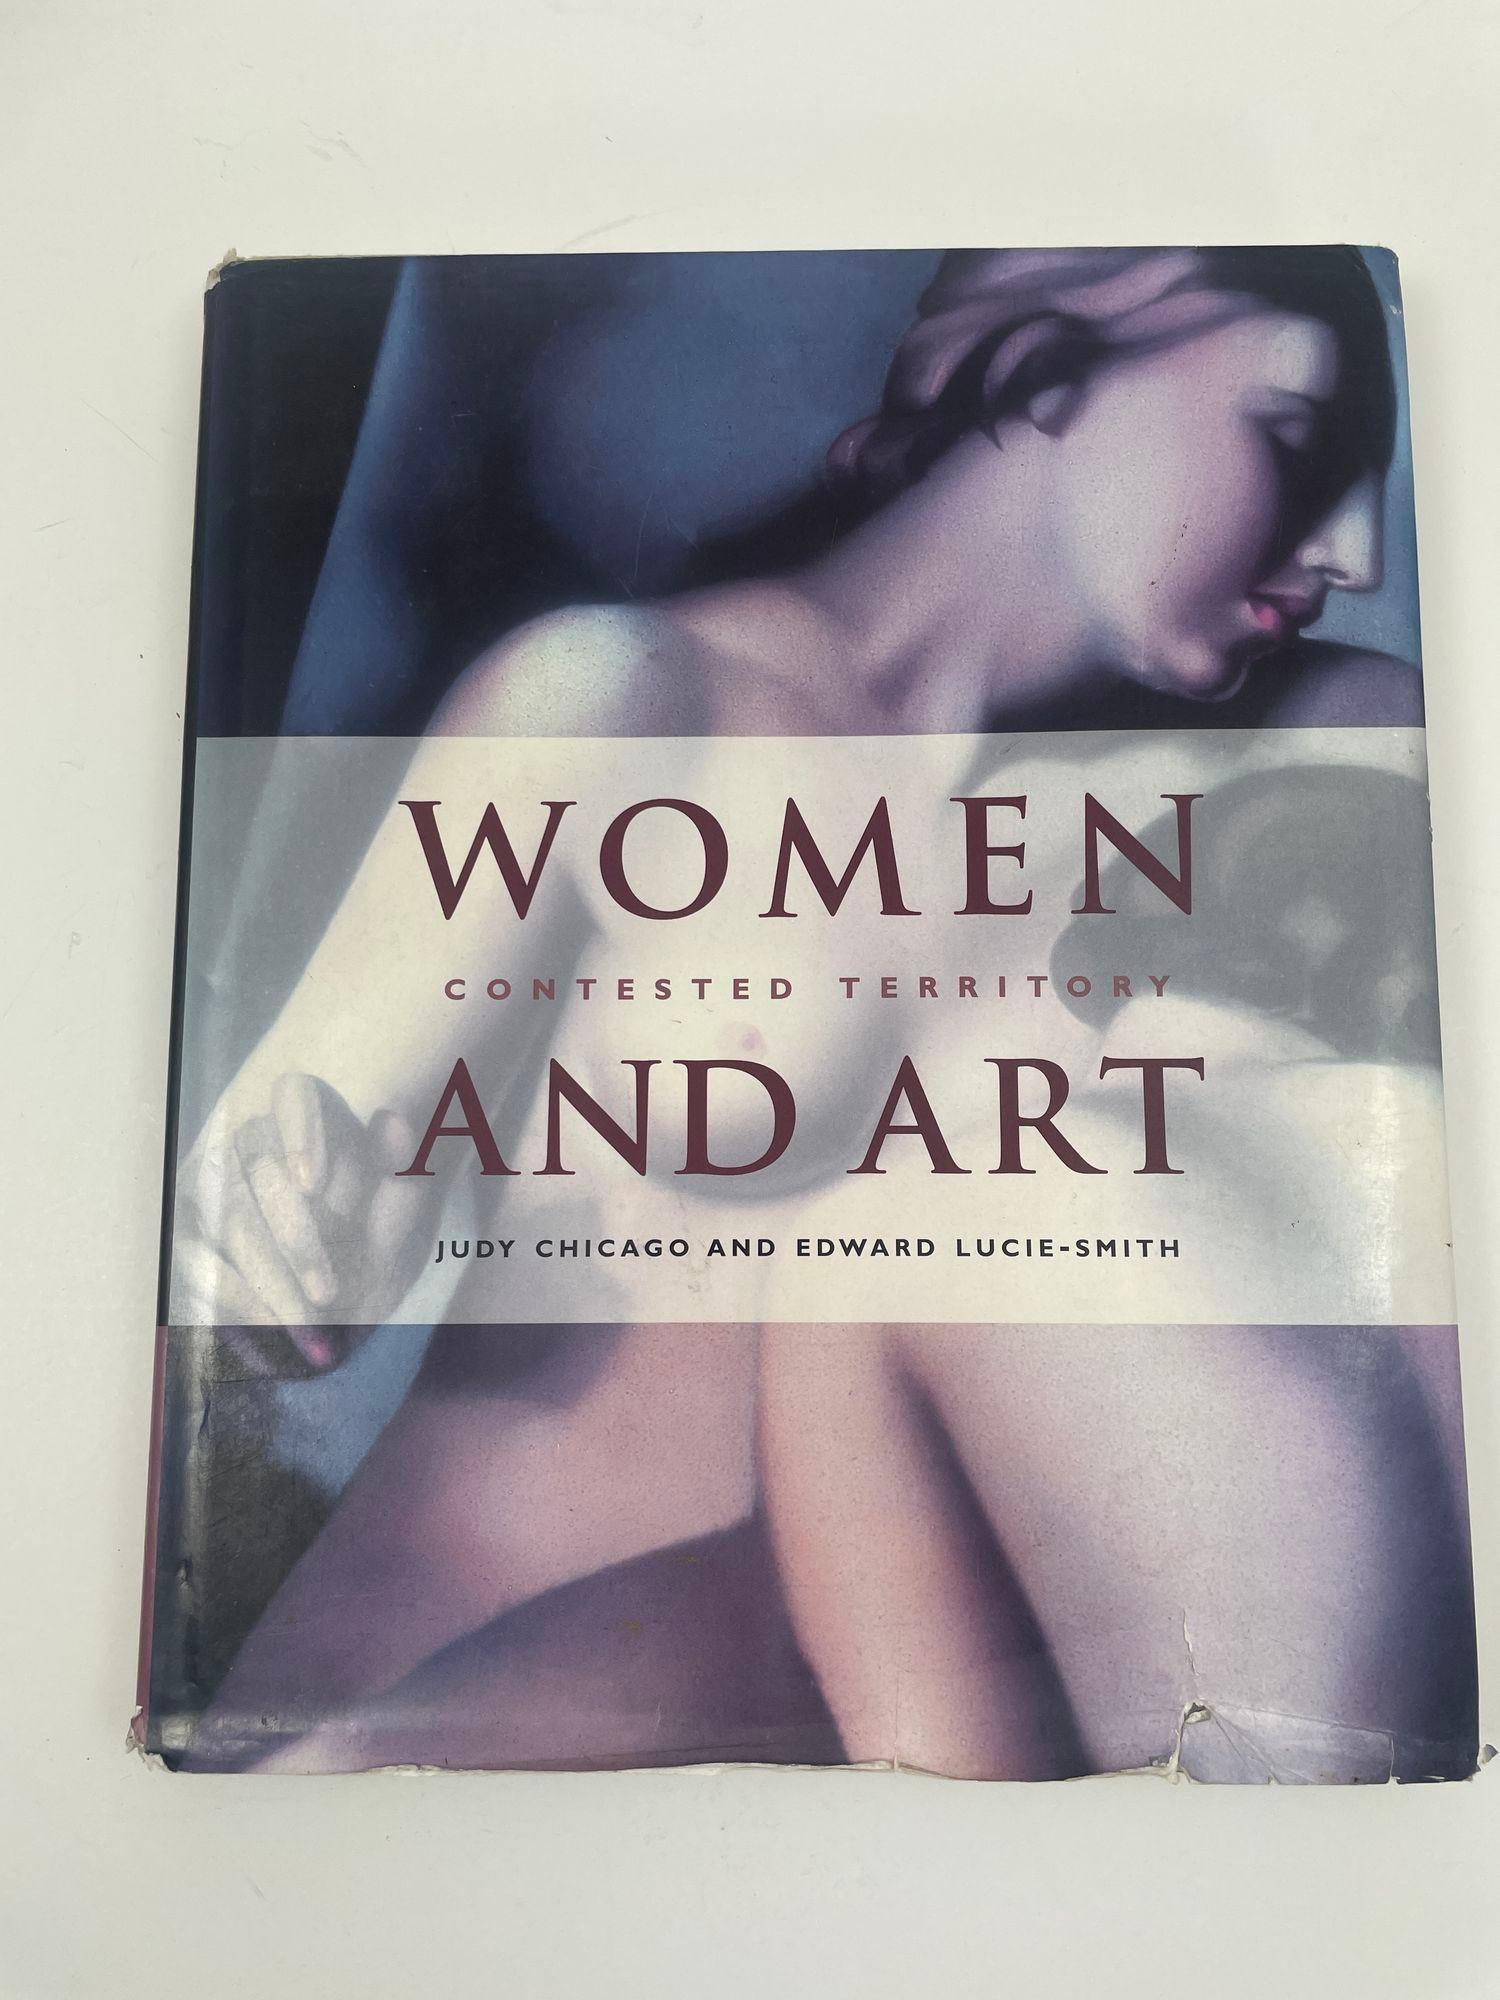 Women And Art Contested Territory by Judy Chicago and Edward Lucie-Smith Hardcover Book.
Published: Watson-Guptill.
Publications, New York.
1999, First Edition First Printing.
This hardcover book measures 9 1/4